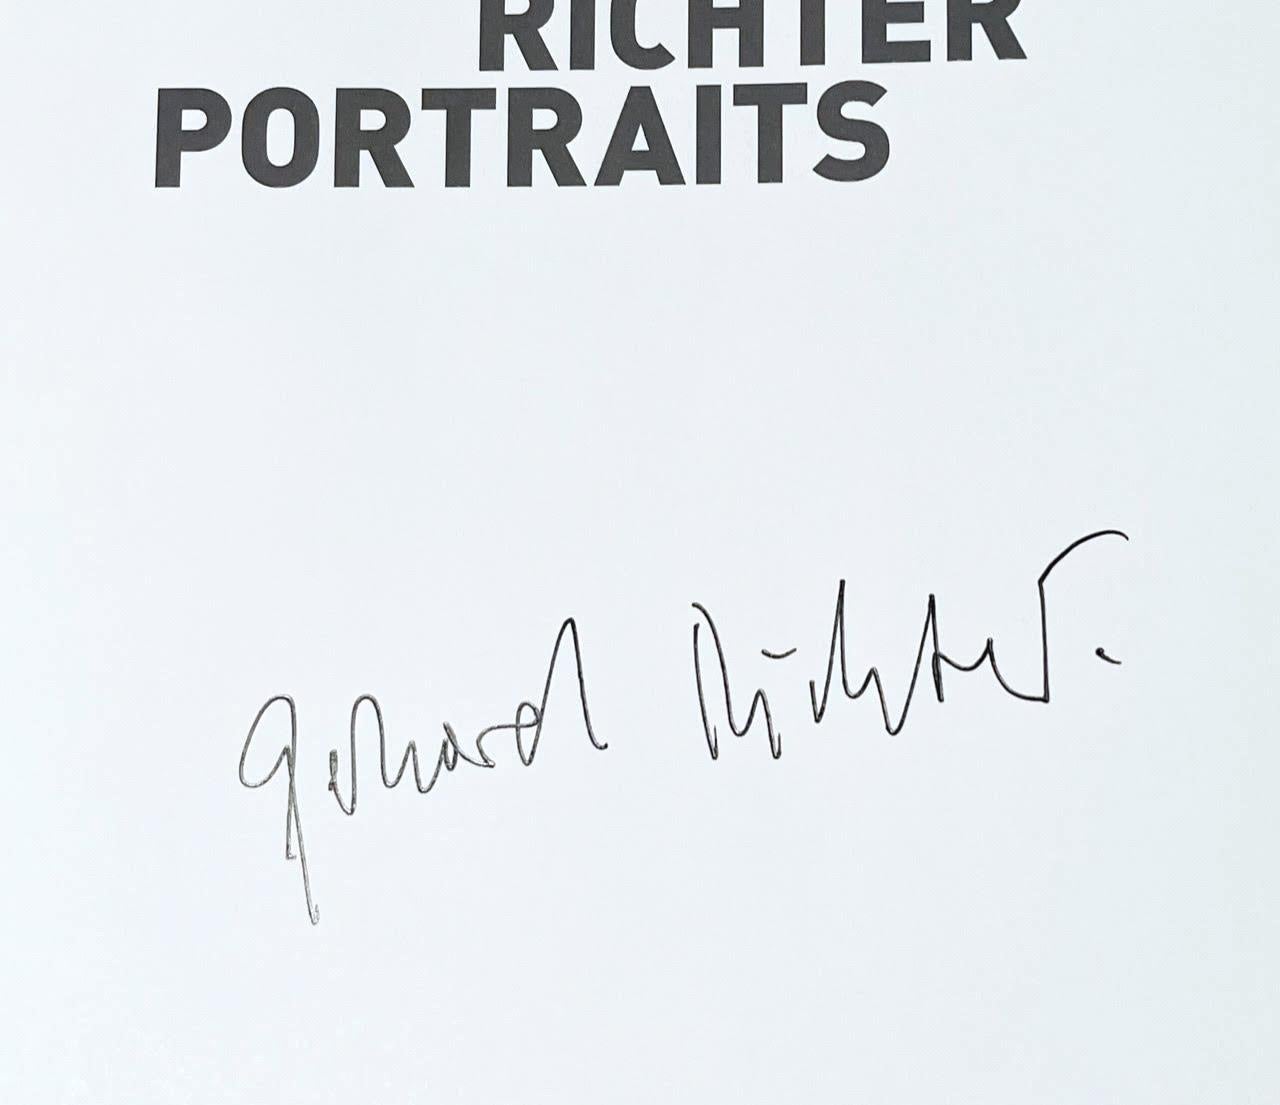 Monograph: GERHARD RICHTER PORTRAITS (official hand signed book - 1 of only 50) - Contemporary Art by Gerhard Richter